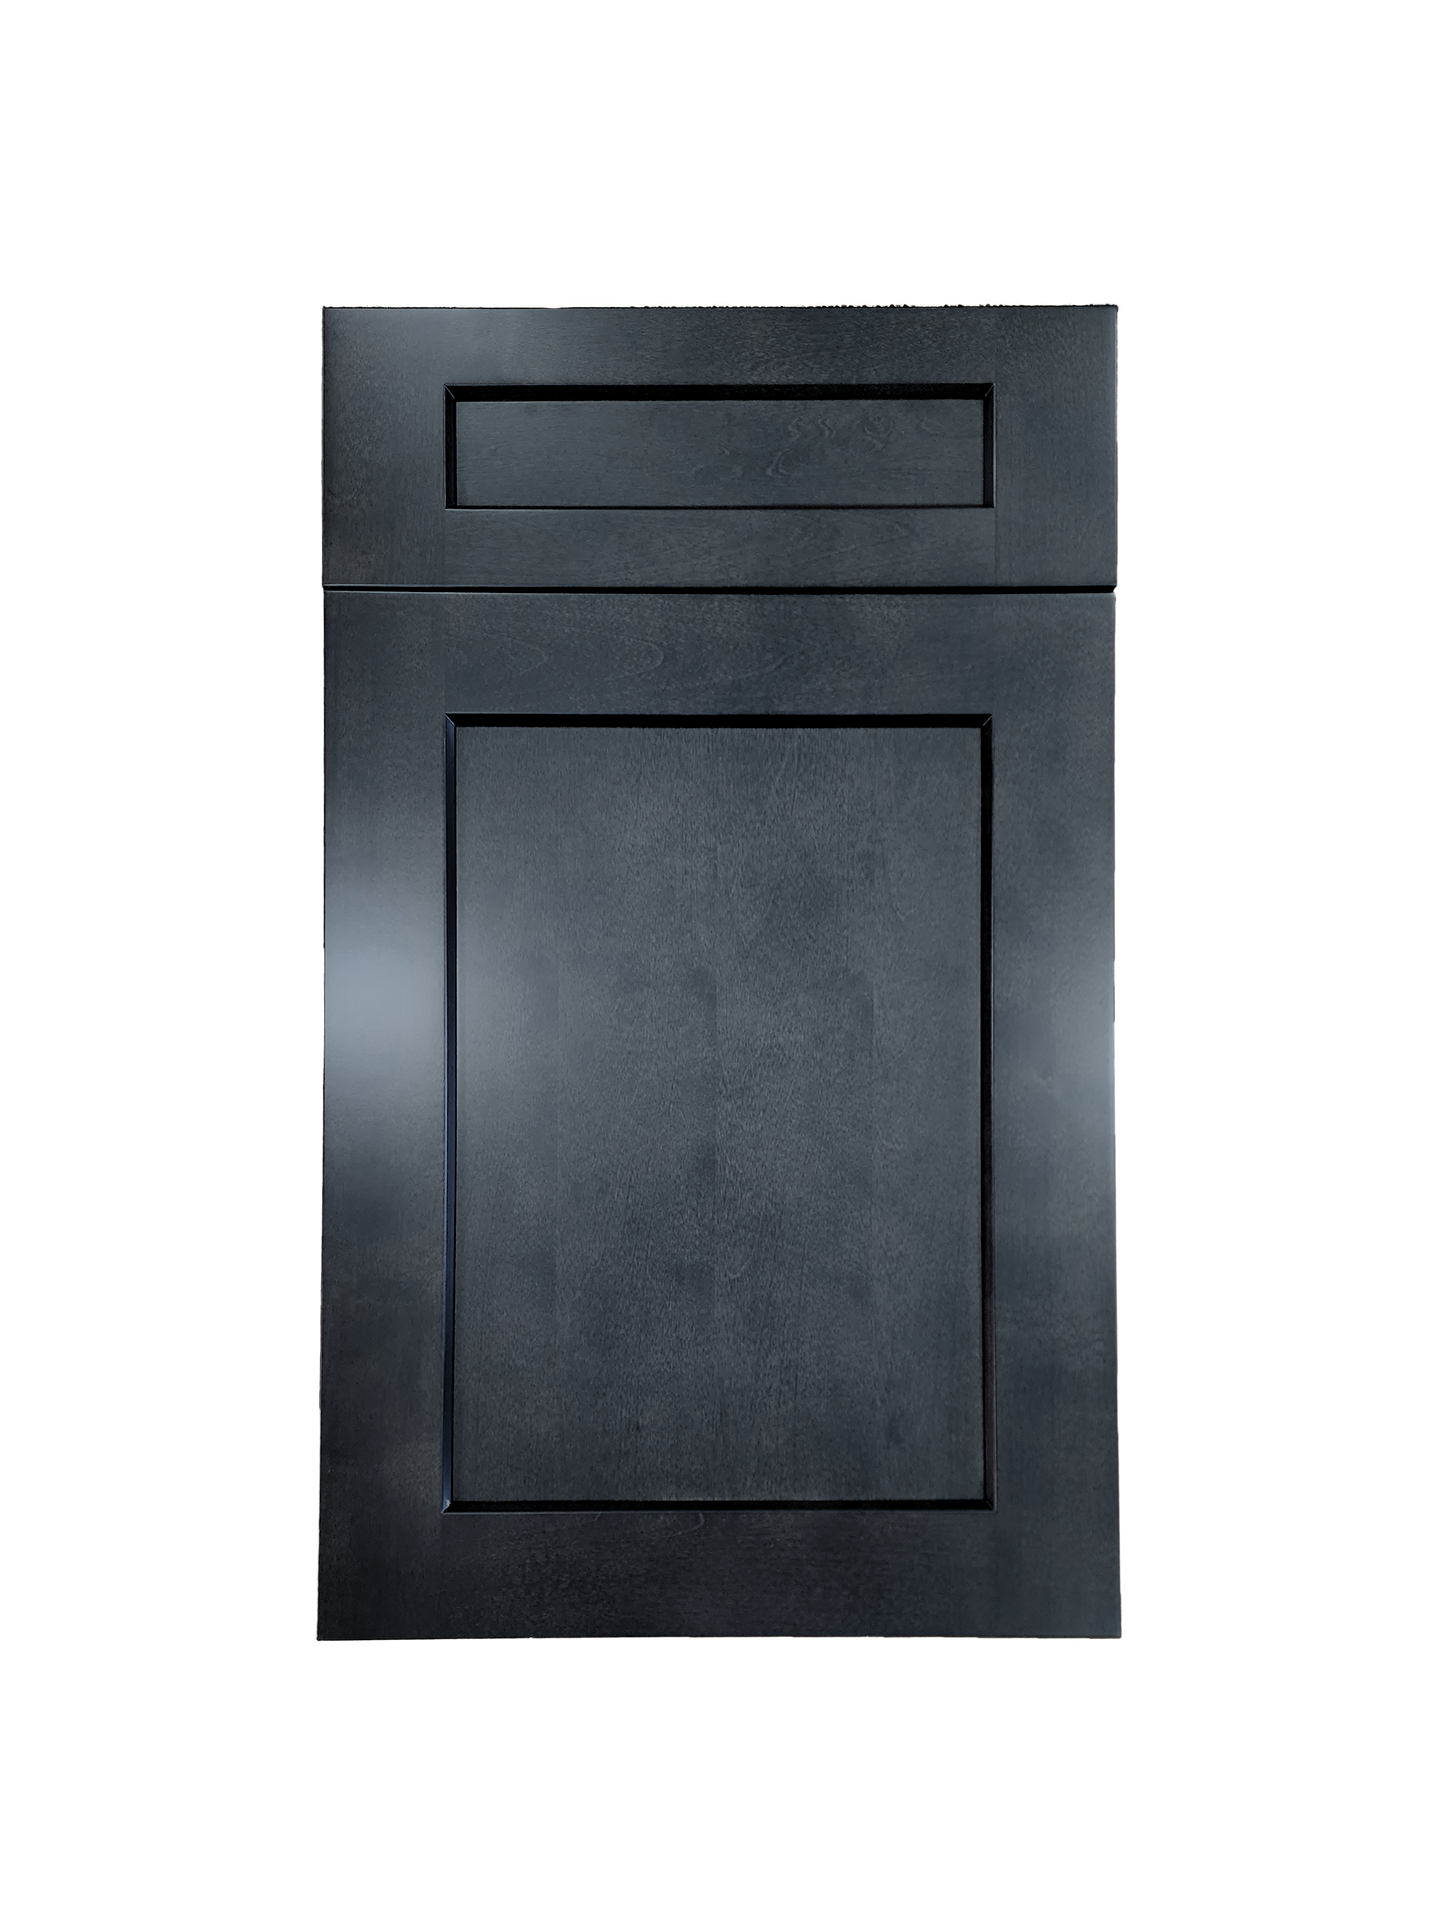 Stormy Grey Pantry Cabinet 18 inches wide 24 inches deep 96 inches tall with Stormy Grey box and Stormy Grey doors